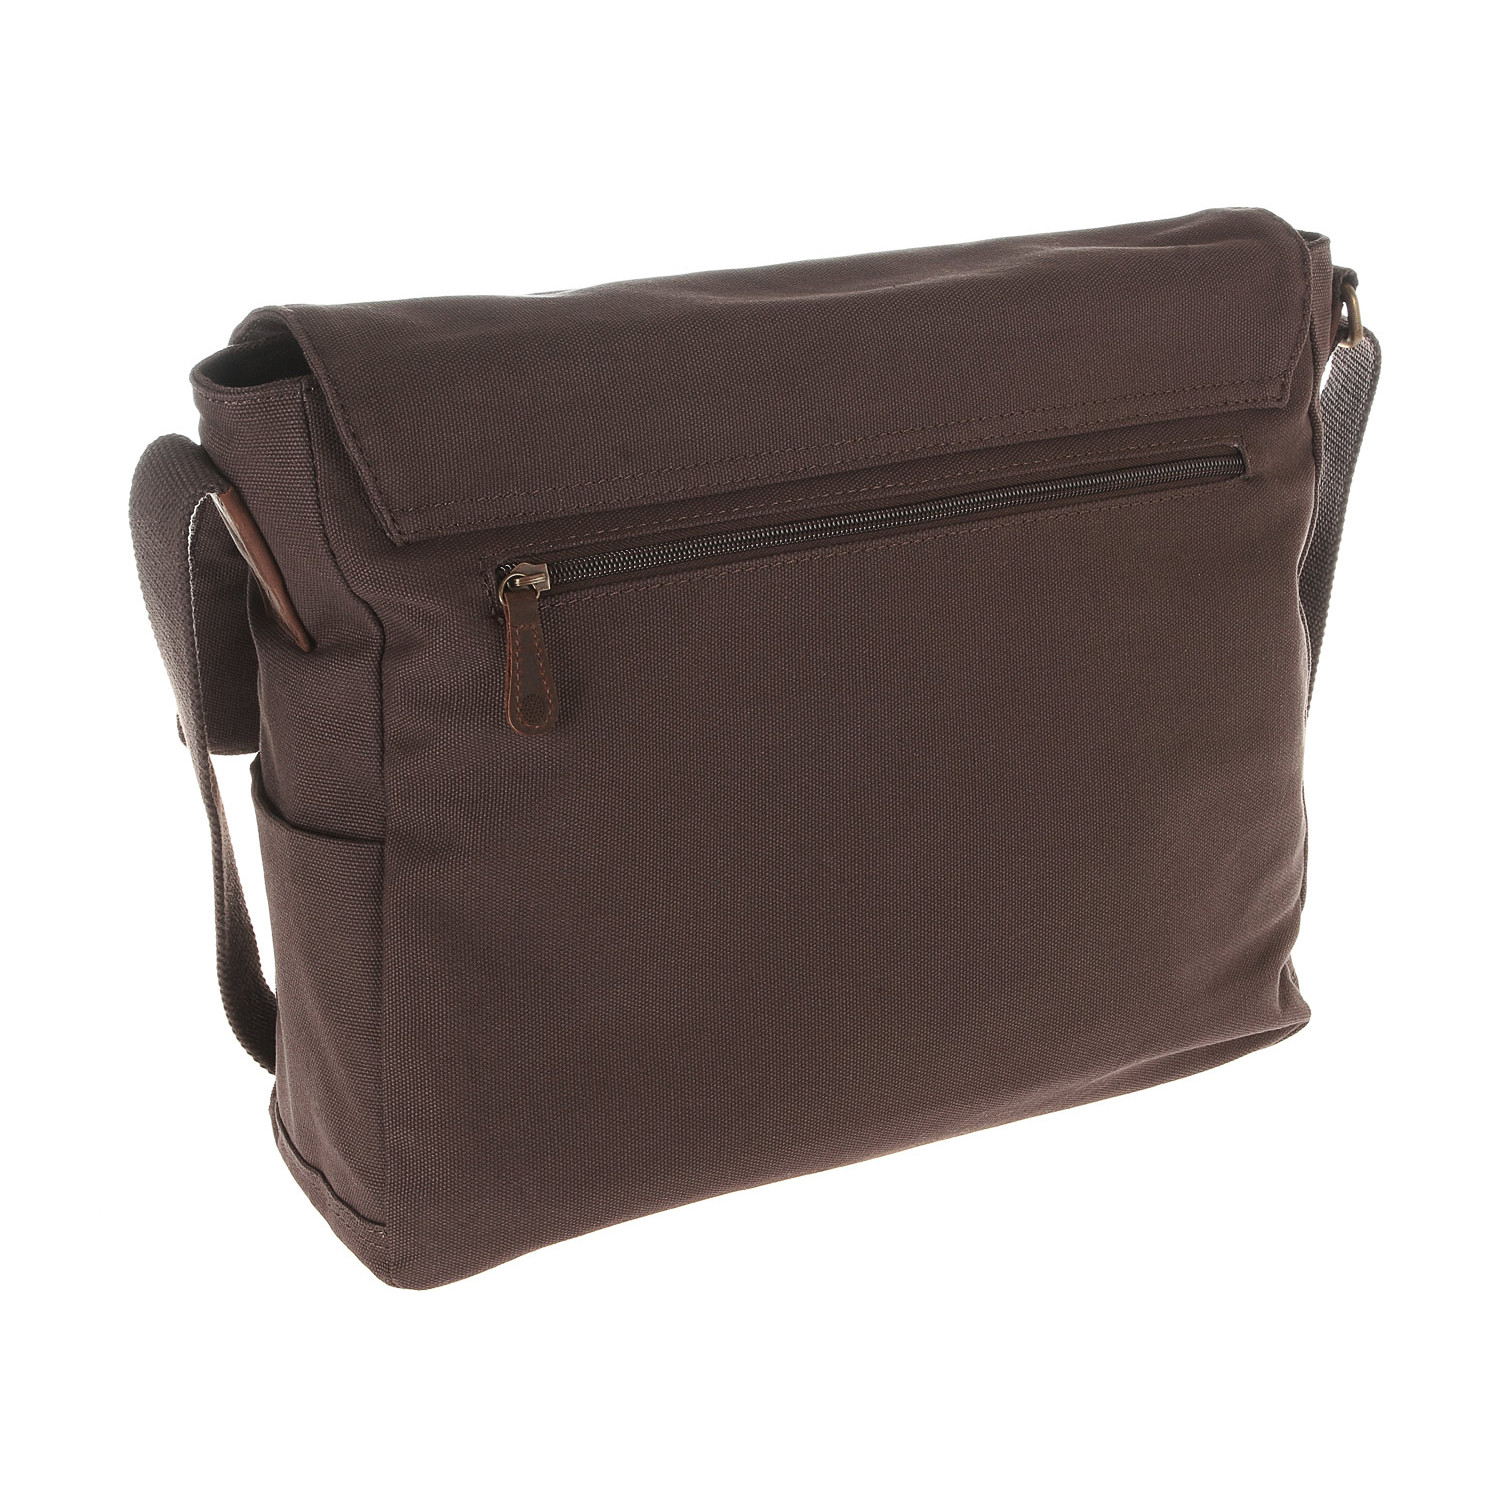 Hoxton Canvas + Leather Messenger Bag // Woodland Brown - Conkca London ...